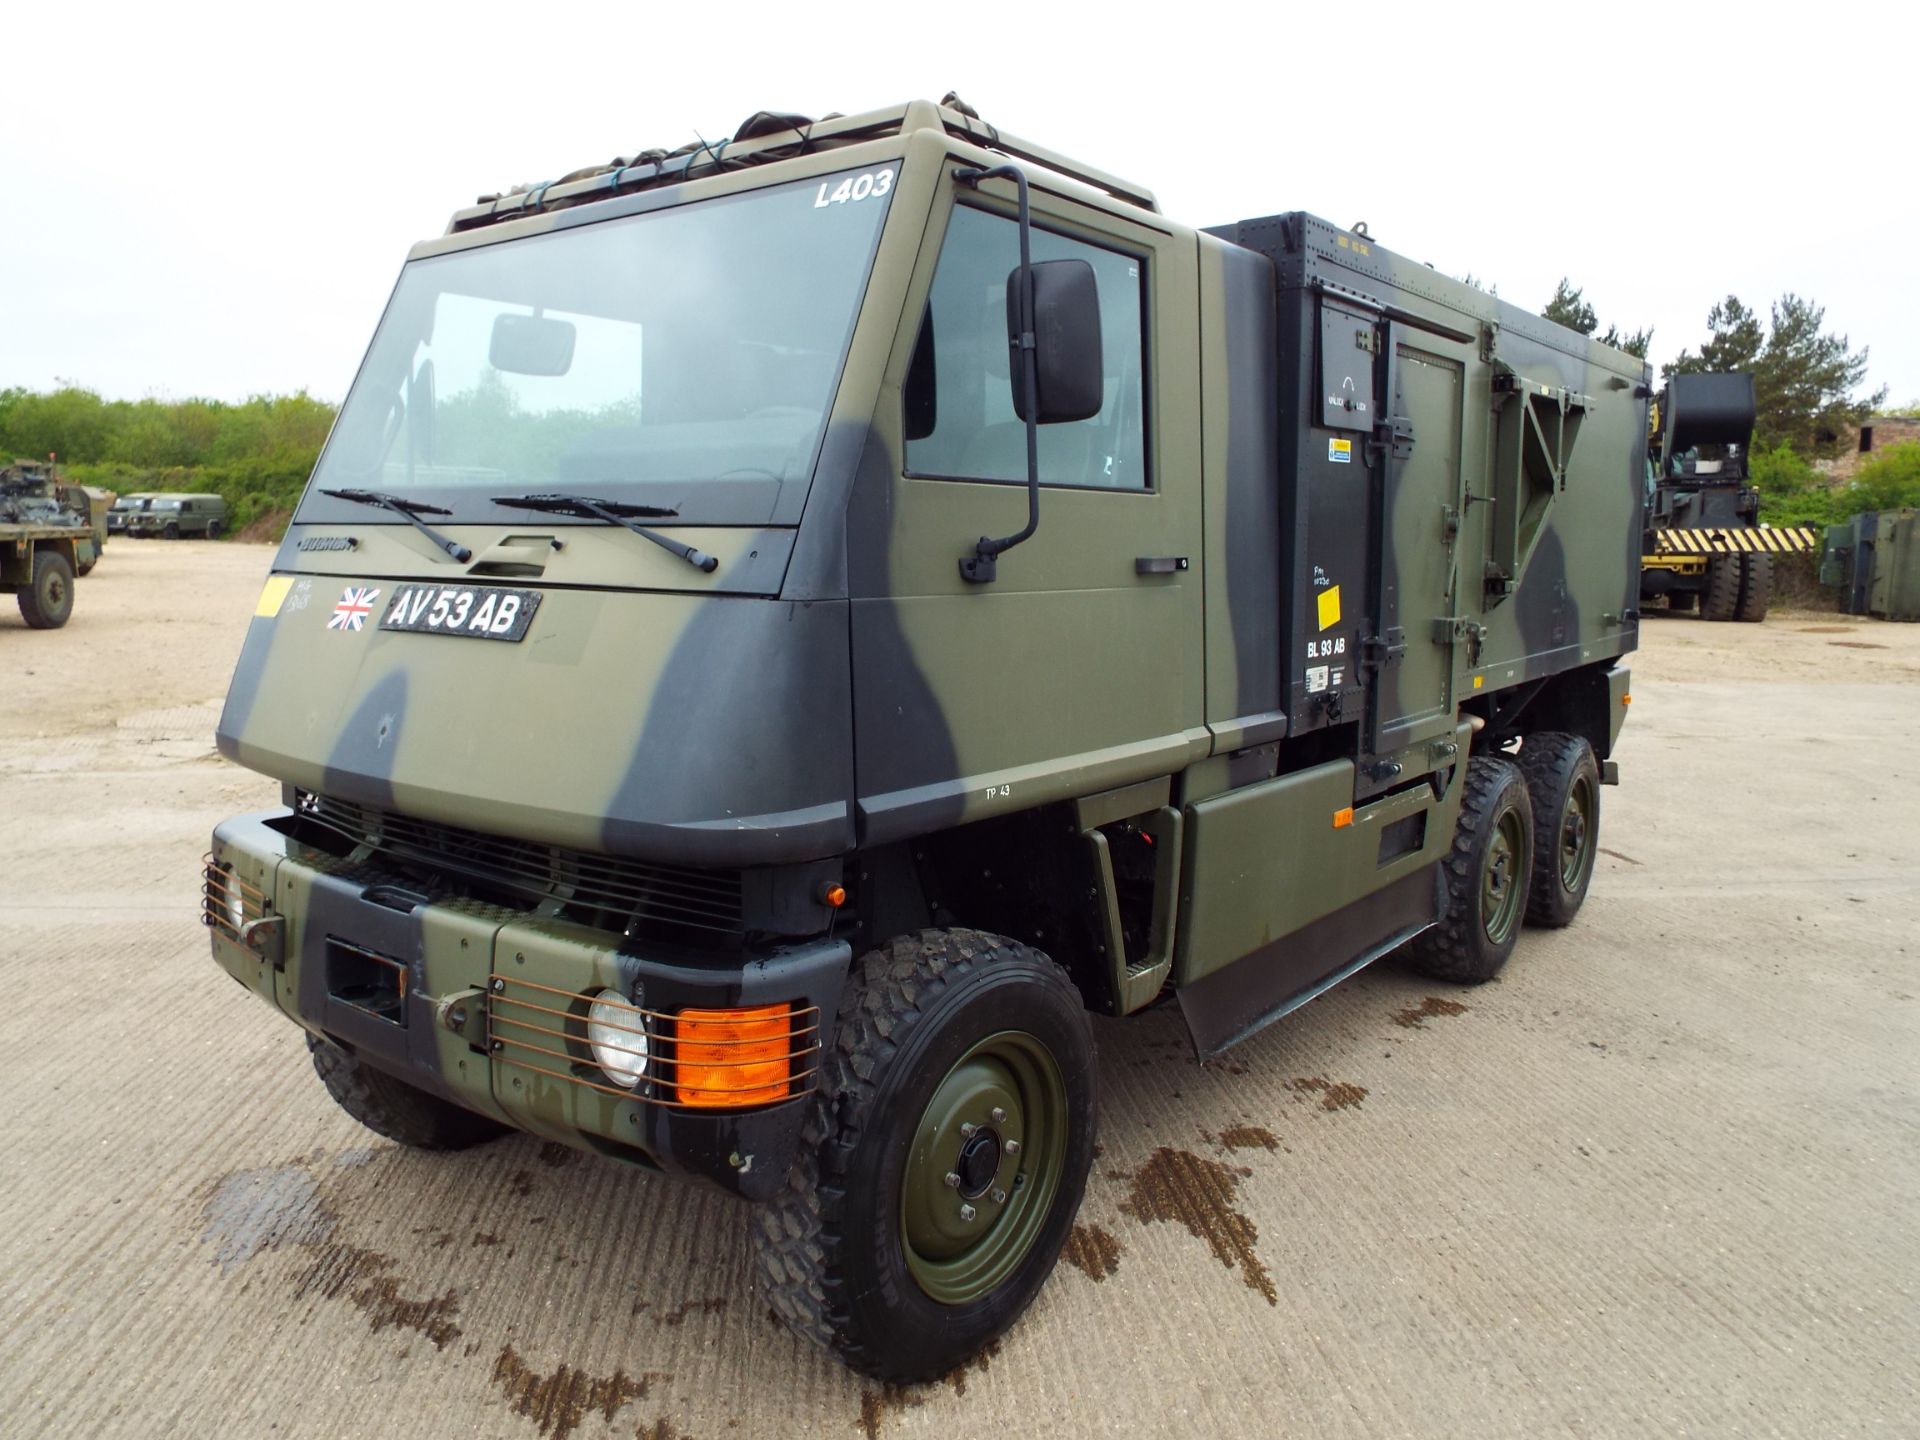 Ex Reserve Left Hand Drive Mowag Bucher Duro II 6x6 High-Mobility Tactical Vehicle - Image 3 of 28